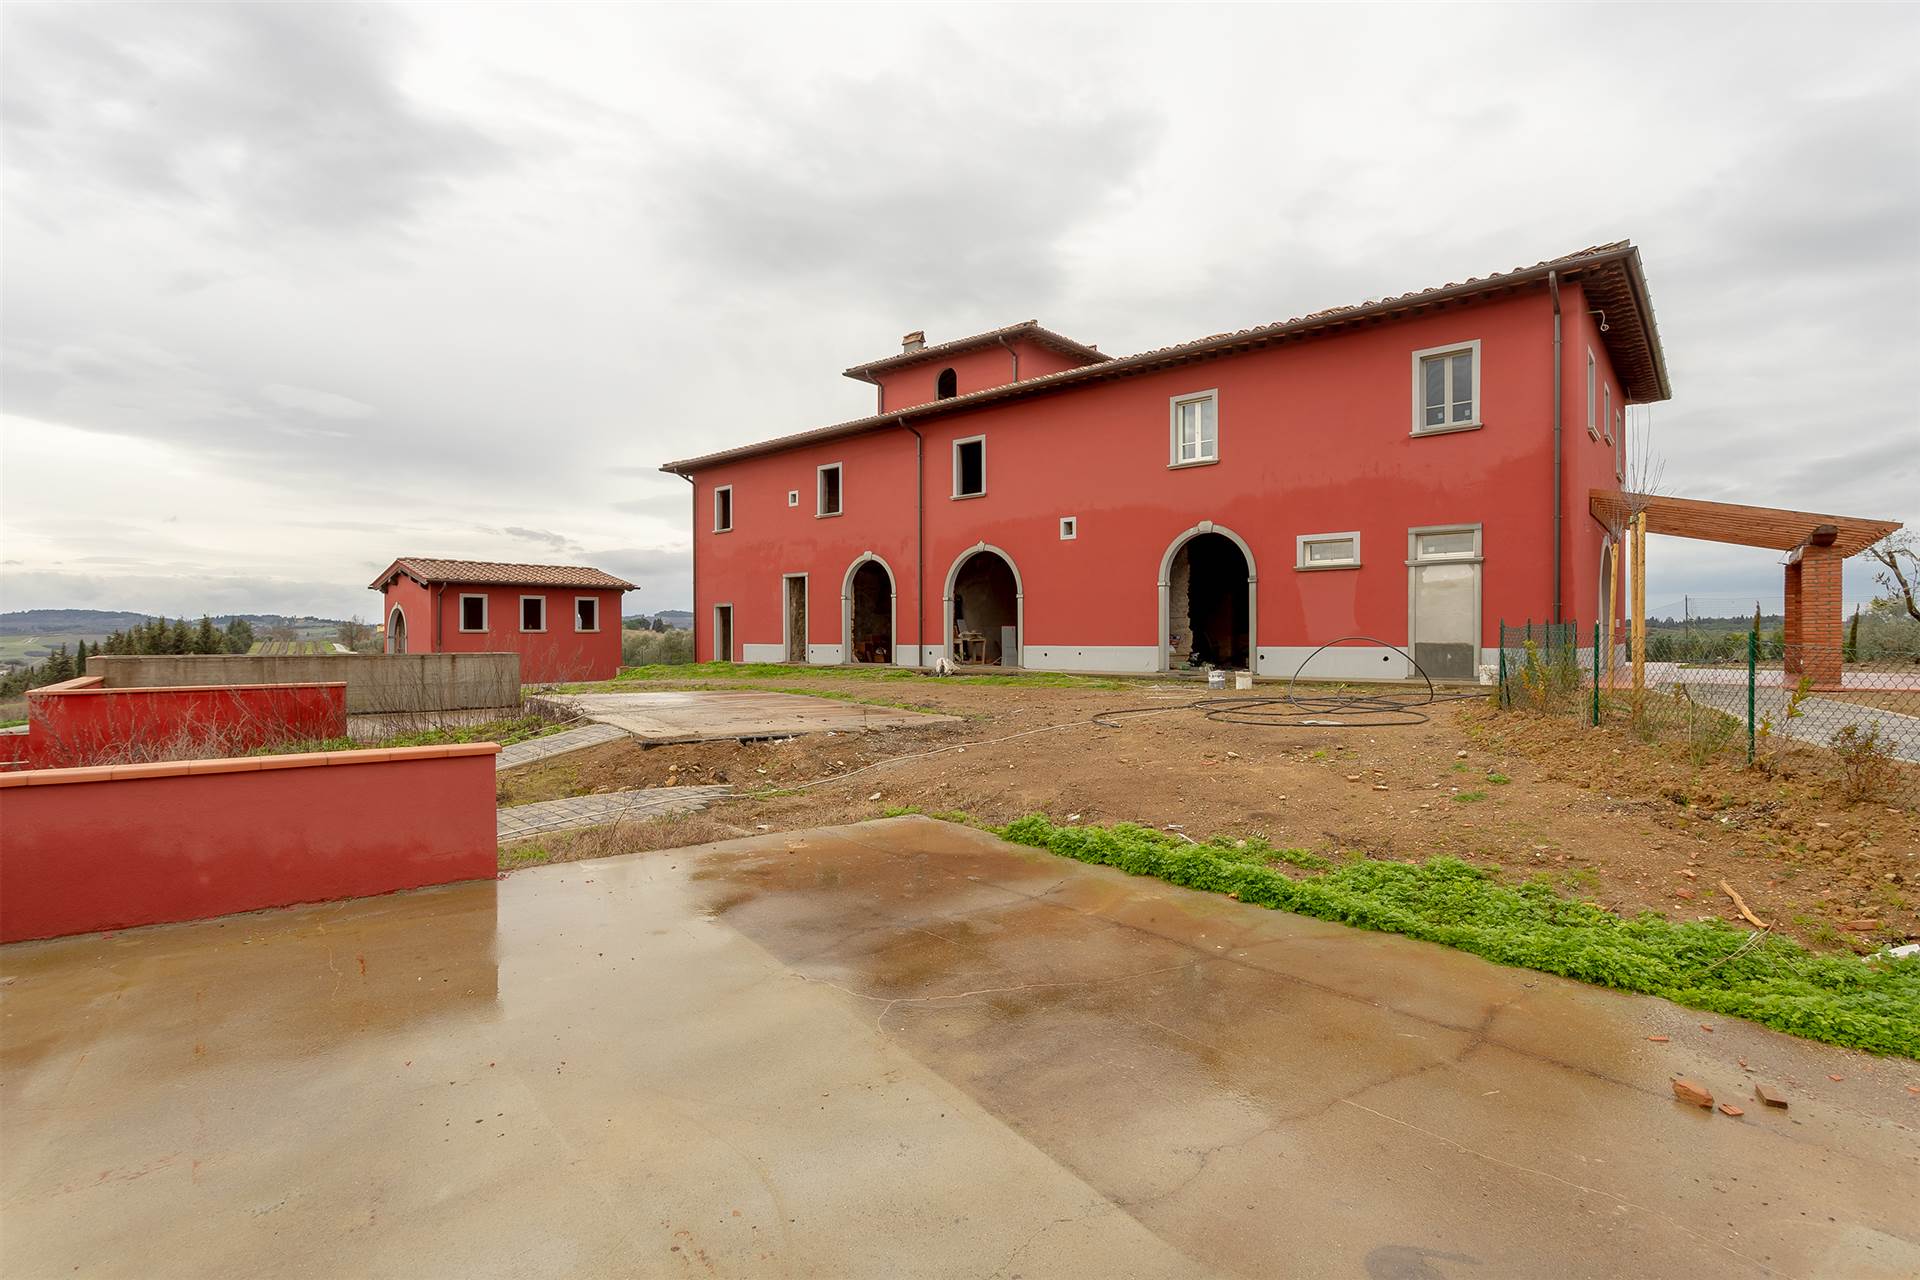 MALMANTILE, LASTRA A SIGNA, Terraced house for sale of 110 Sq. mt., New construction, Heating Individual heating system, Energetic class: A, placed 